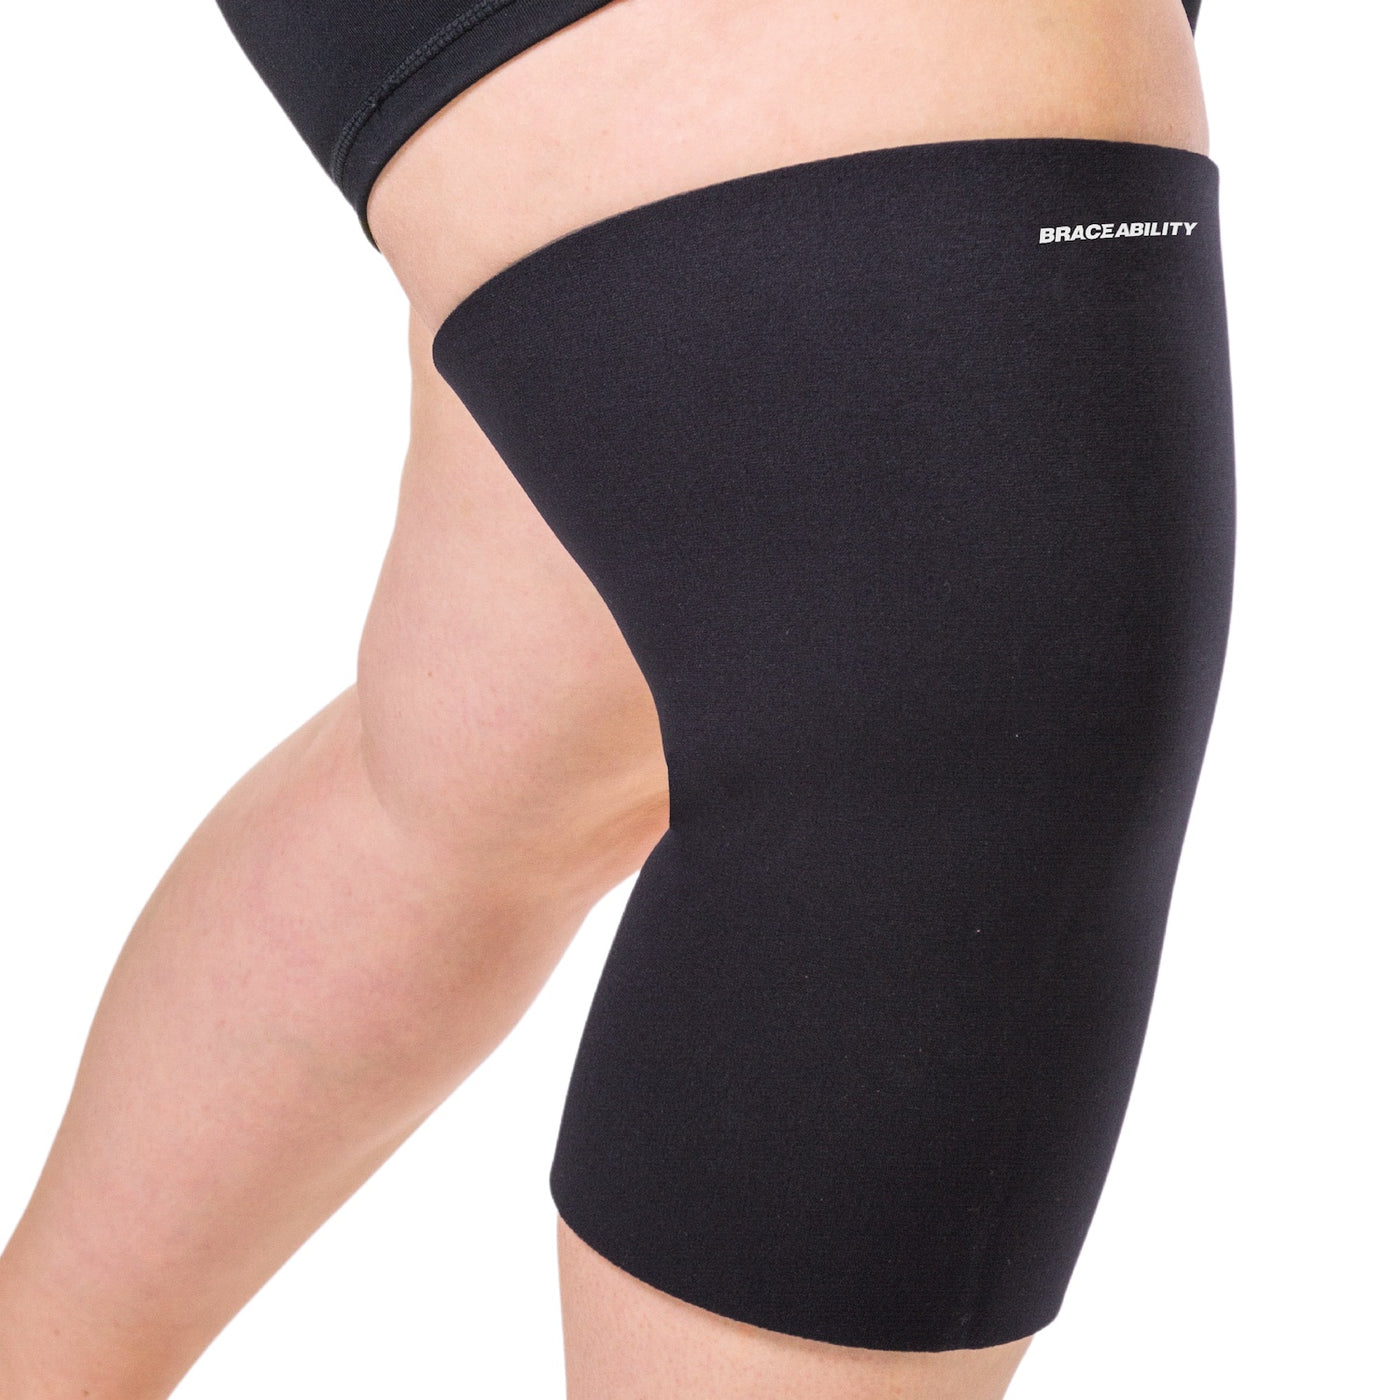 Plus size large compression knee sleeve is available in sizes up to 6XL